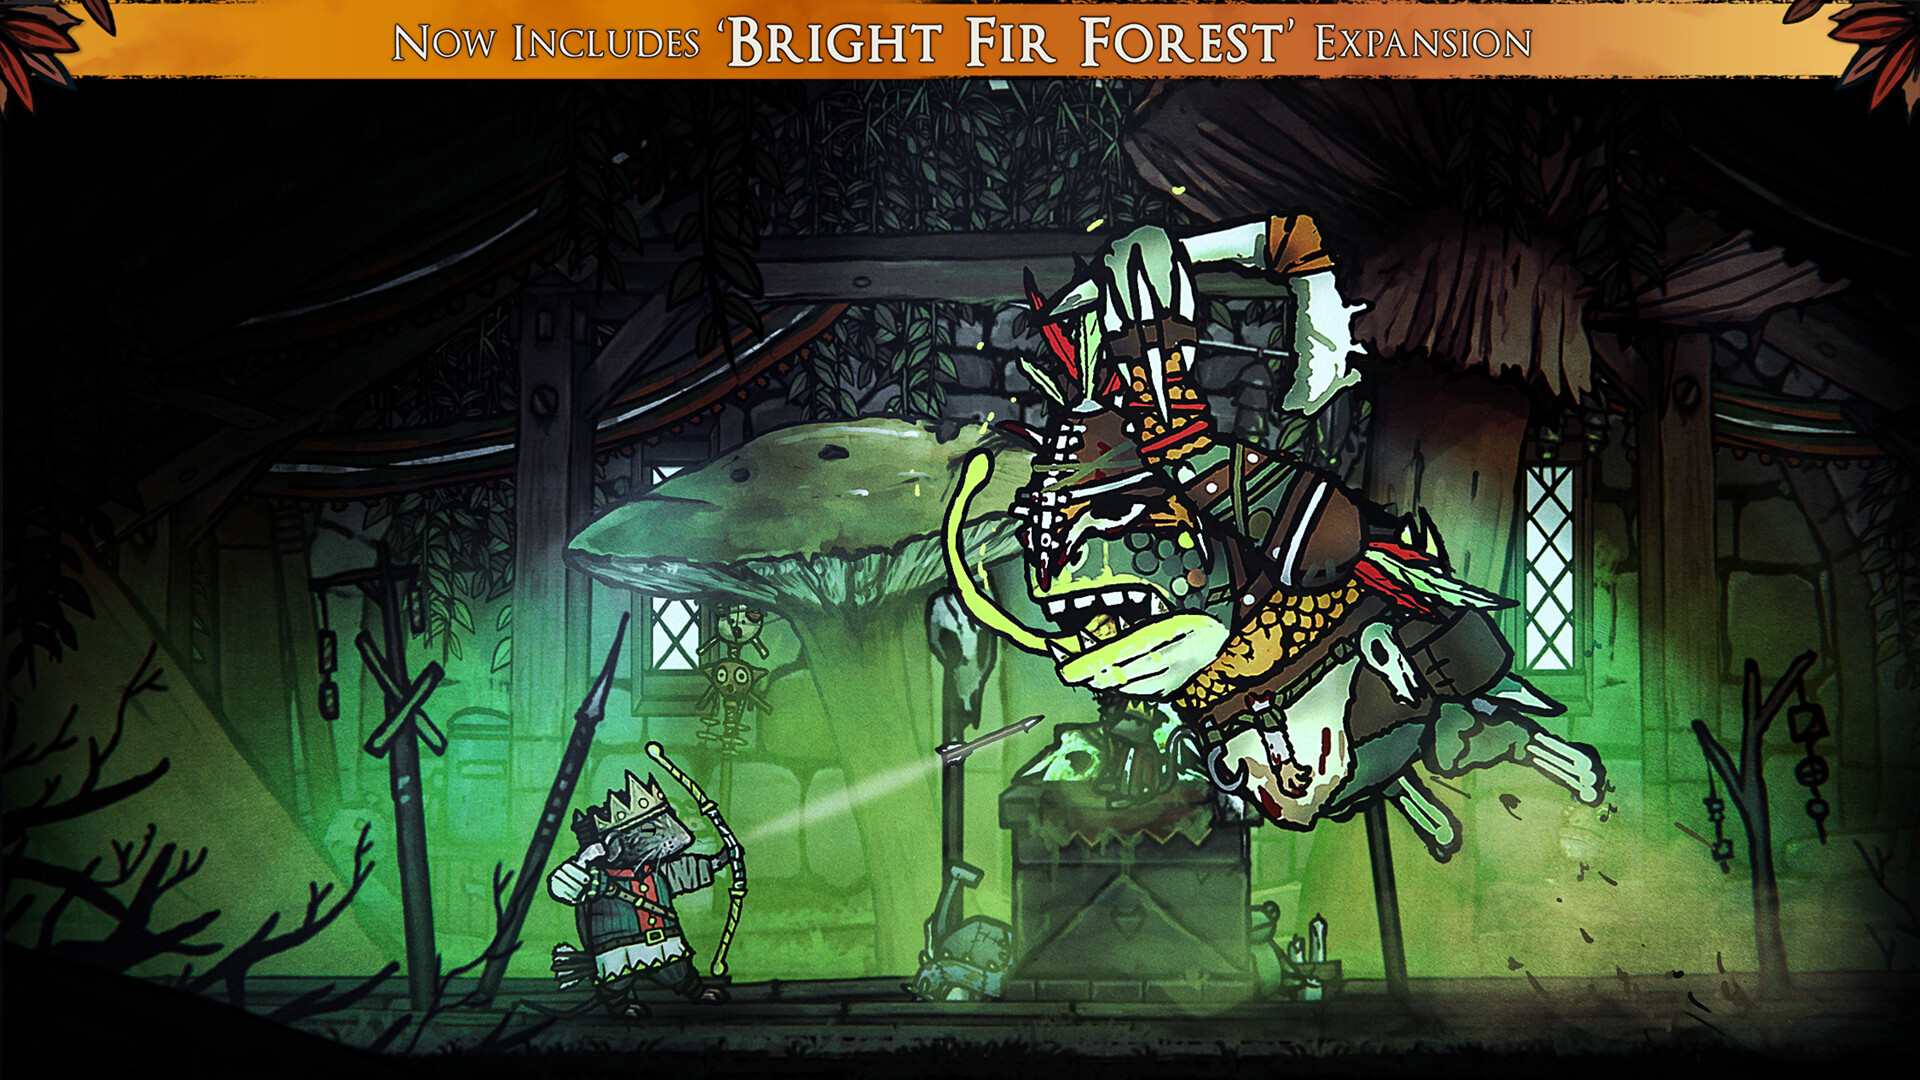 Forest Brothers  Play Now Online for Free 